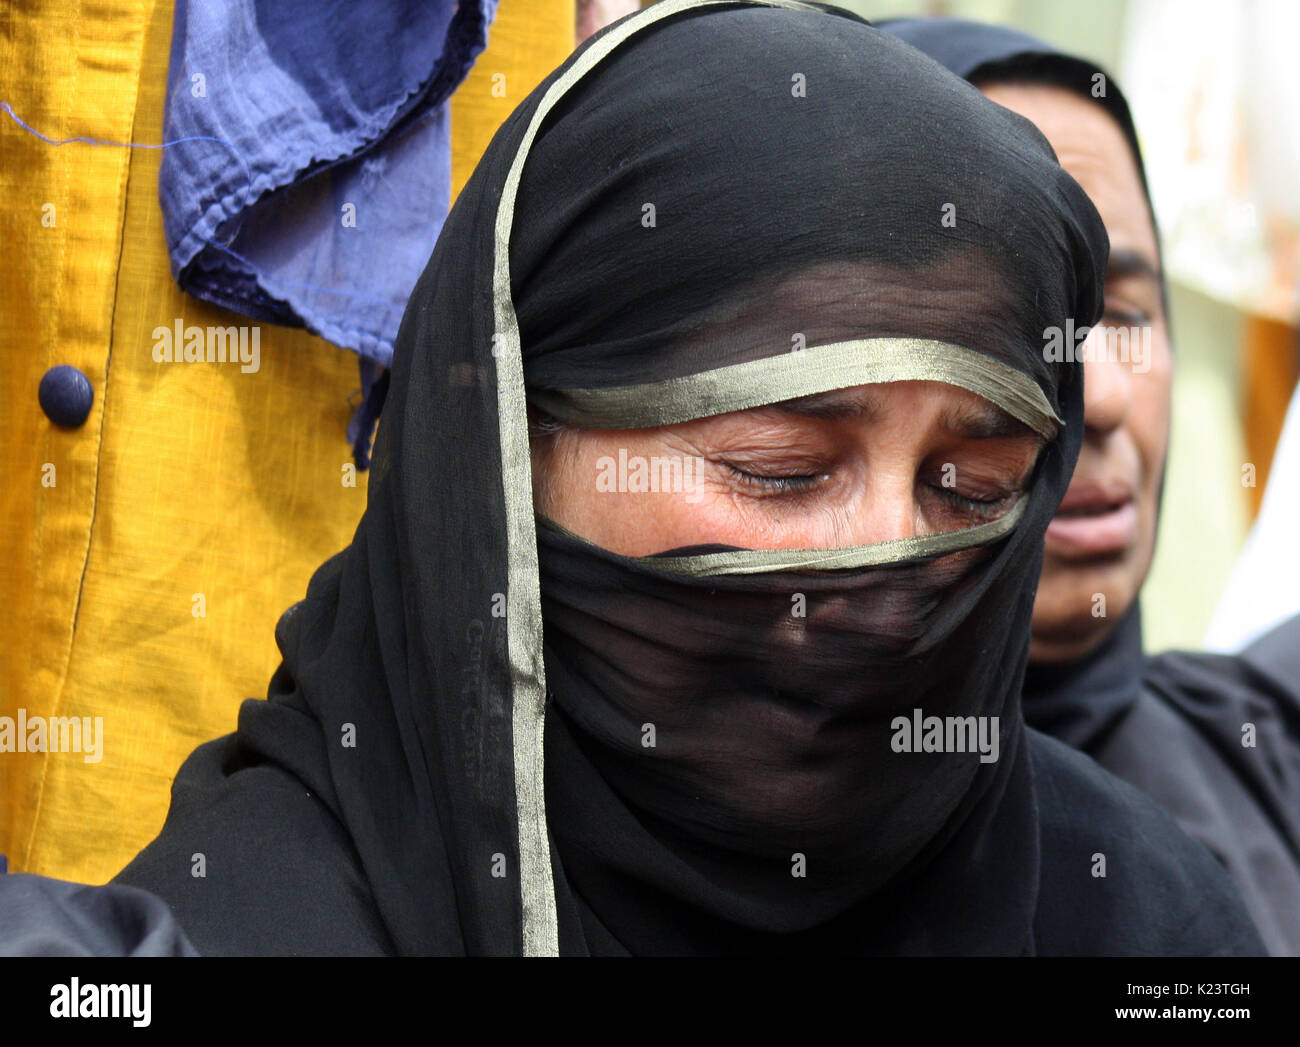 Srinagar, Kashmir. 30th August, 2017.A relative of a disappeared person weeps during, in a silent protest organised by Association of Parents of Disappeared People (APDP) to mark International Day of the Disappeared i.APDP is demanding the setting up of a commission to probe the disappearances of people in Kashmir. According to the APDP, some 8,000 to 10,000 people have gone missing since the beginning of the Kashmir conflict in 1989. Credit: Sofi Suhail/Alamy Live News Stock Photo